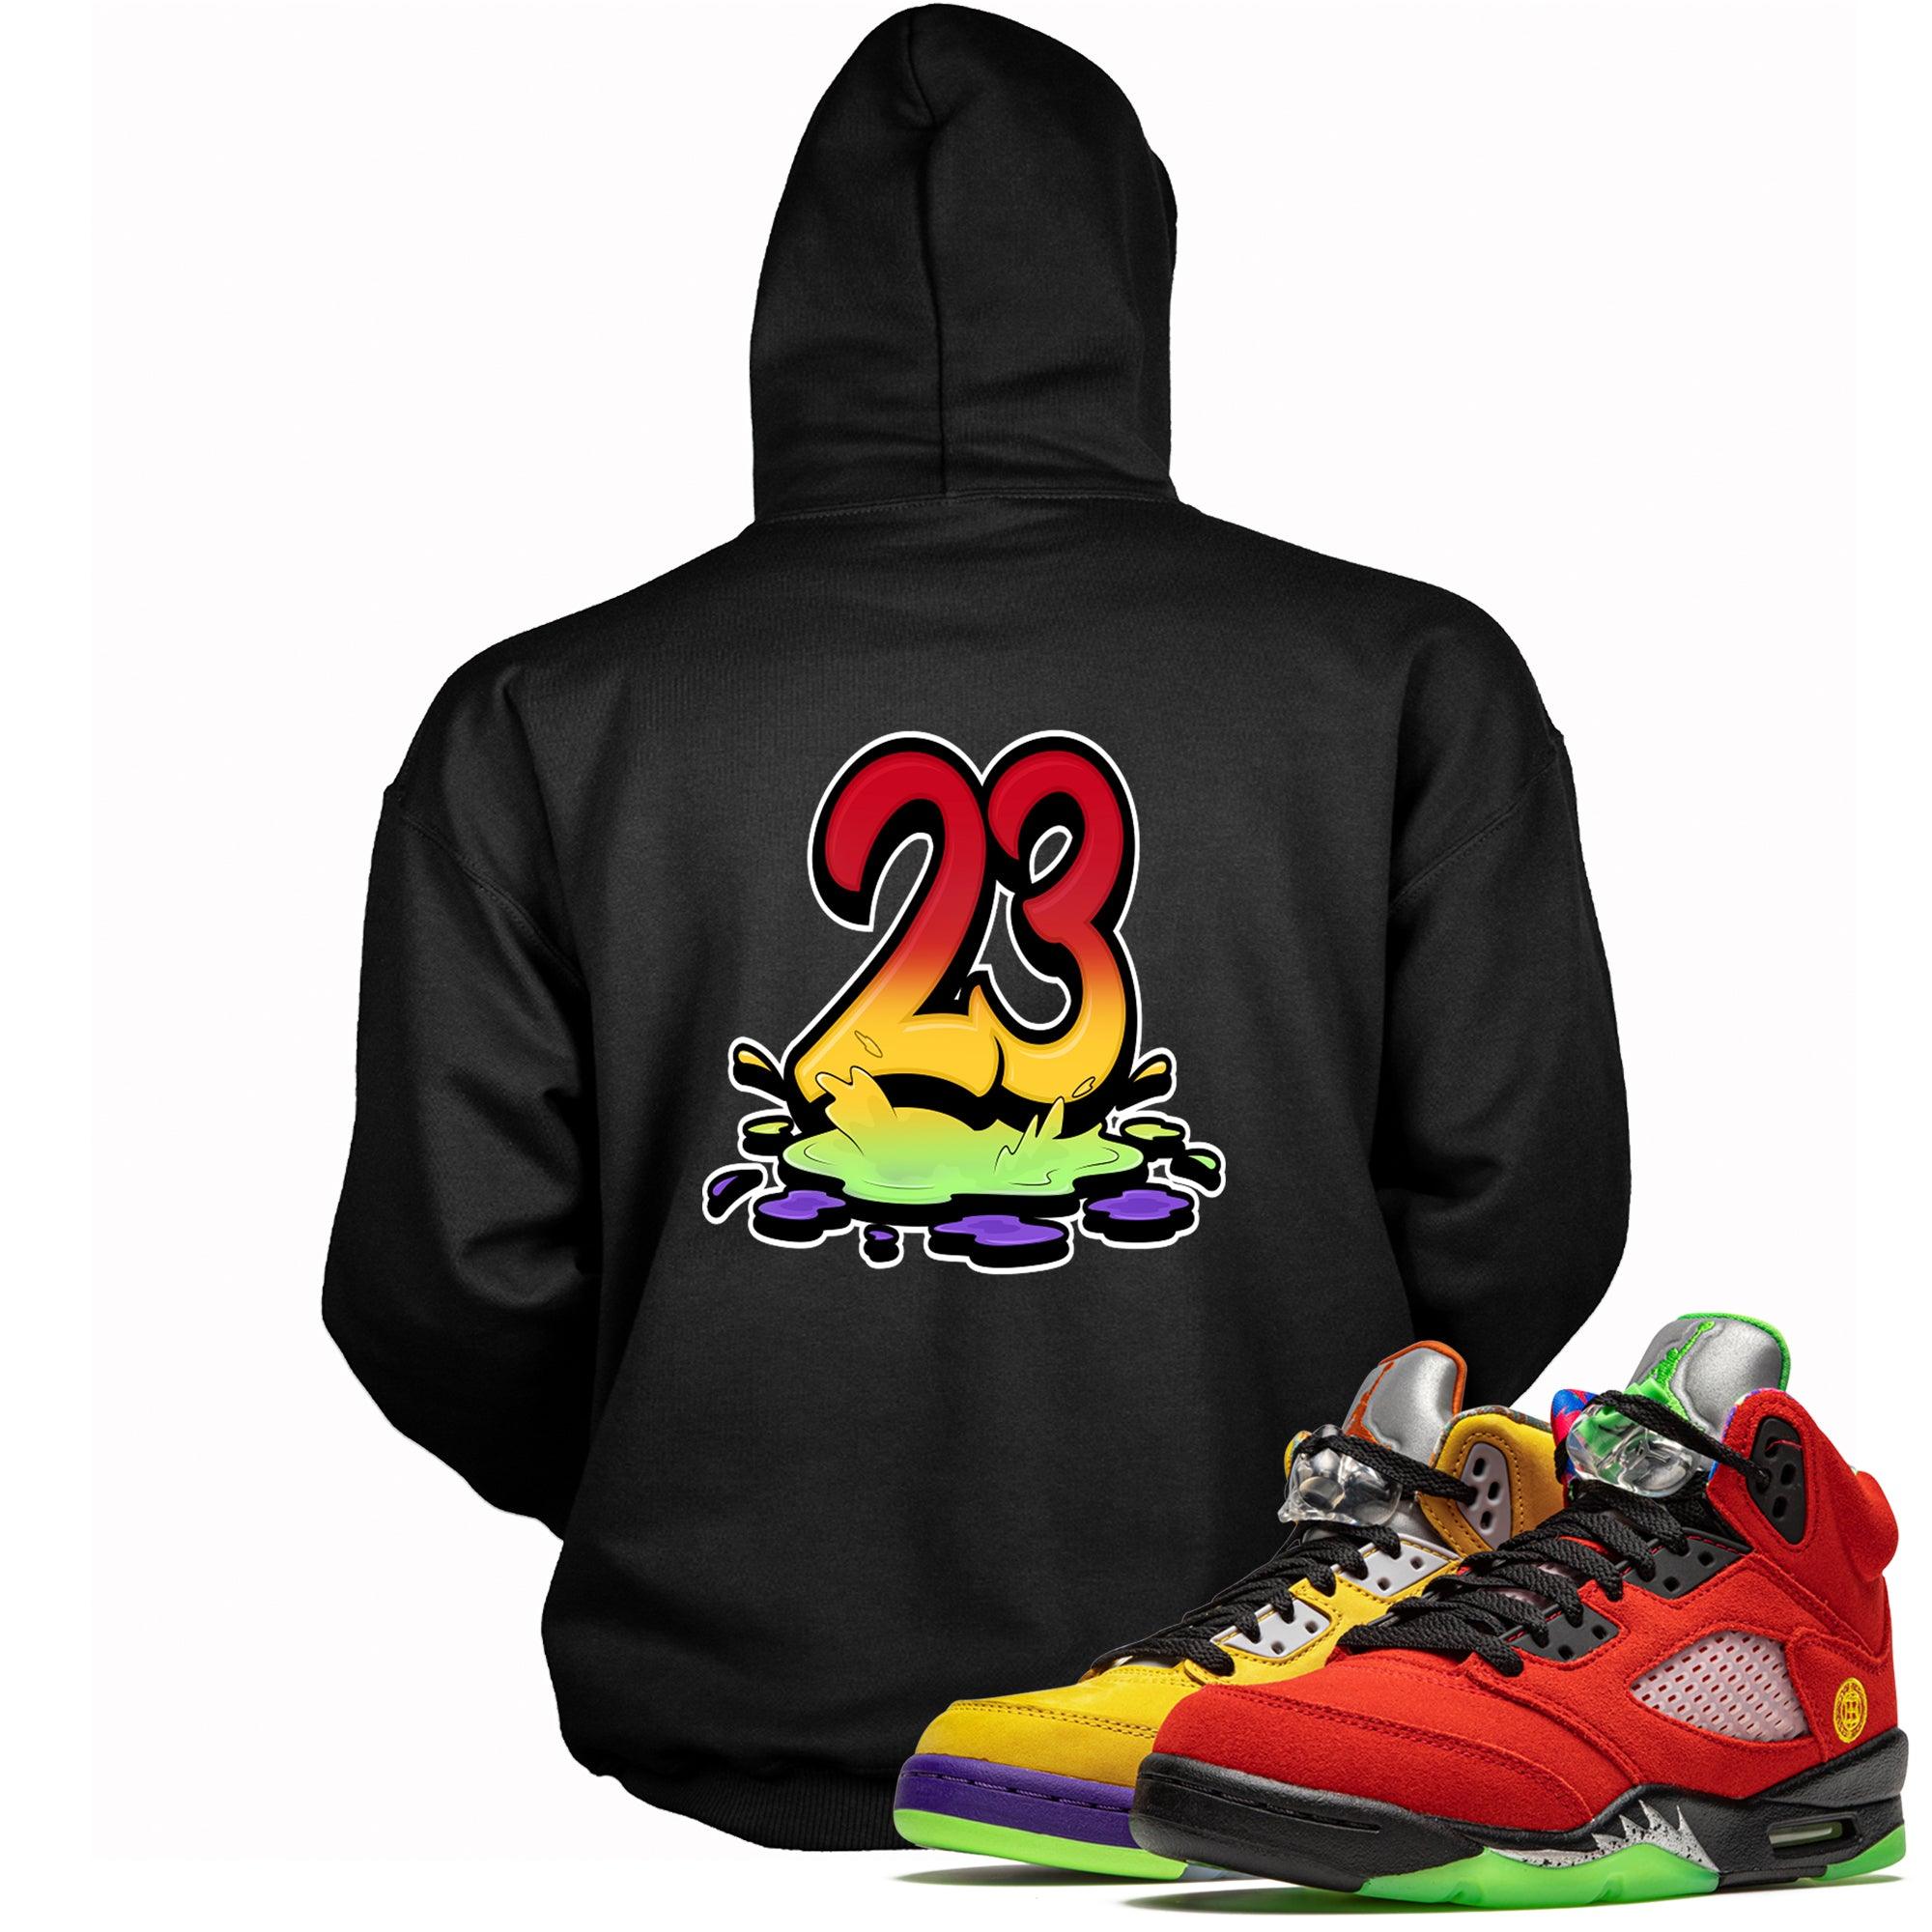 Number 23 Melting Hoodie AJ 5 What The photo